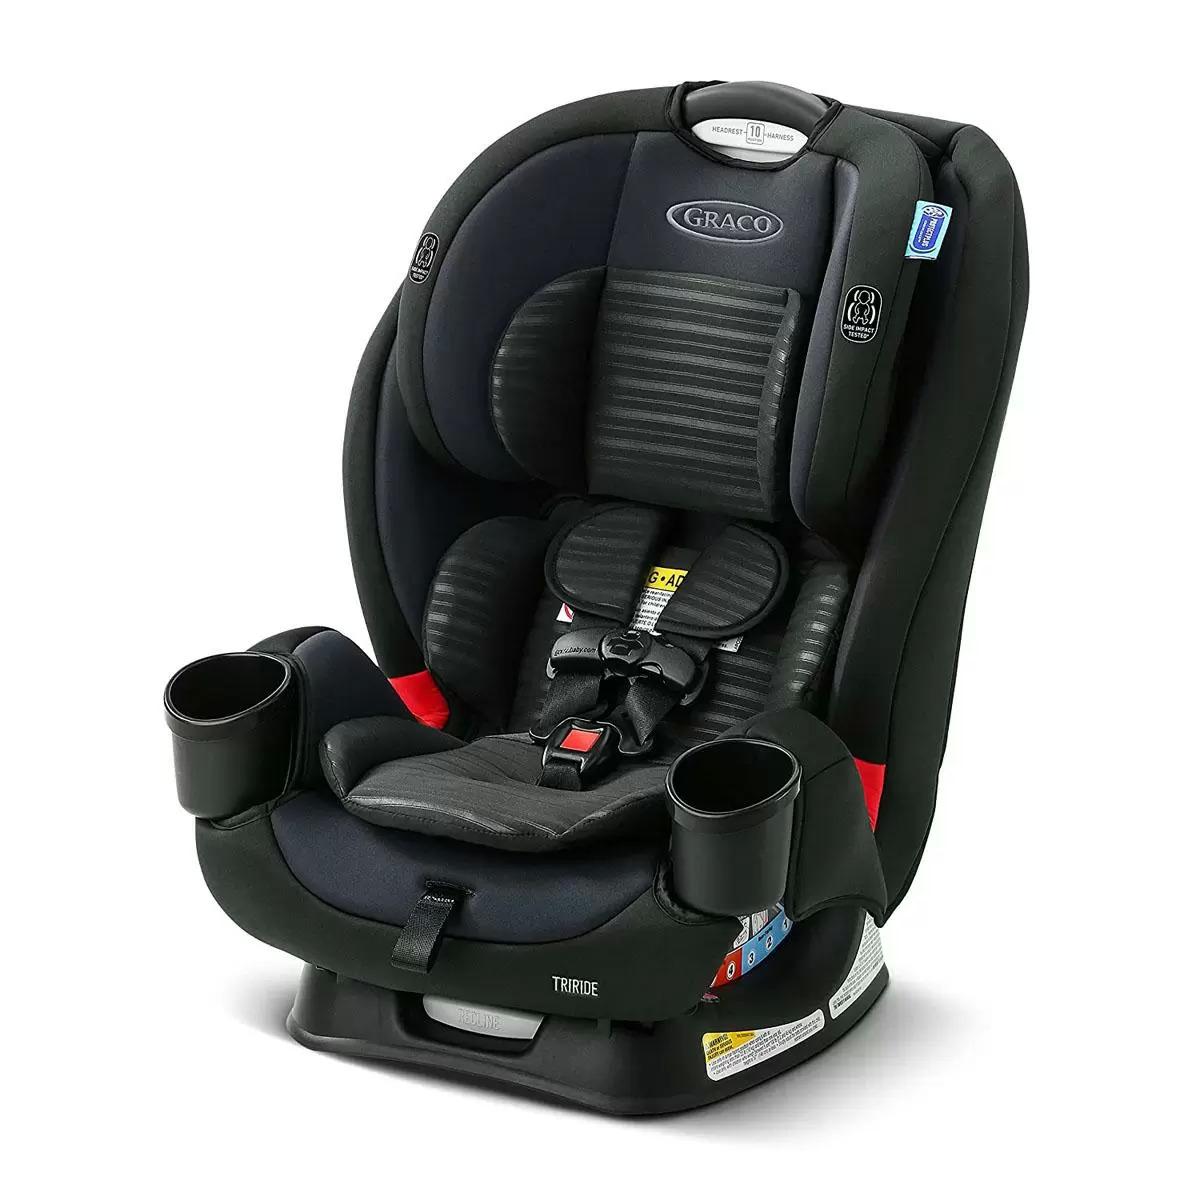 Graco TriRide 3-in-1 Car Seat for $118.97 Shipped